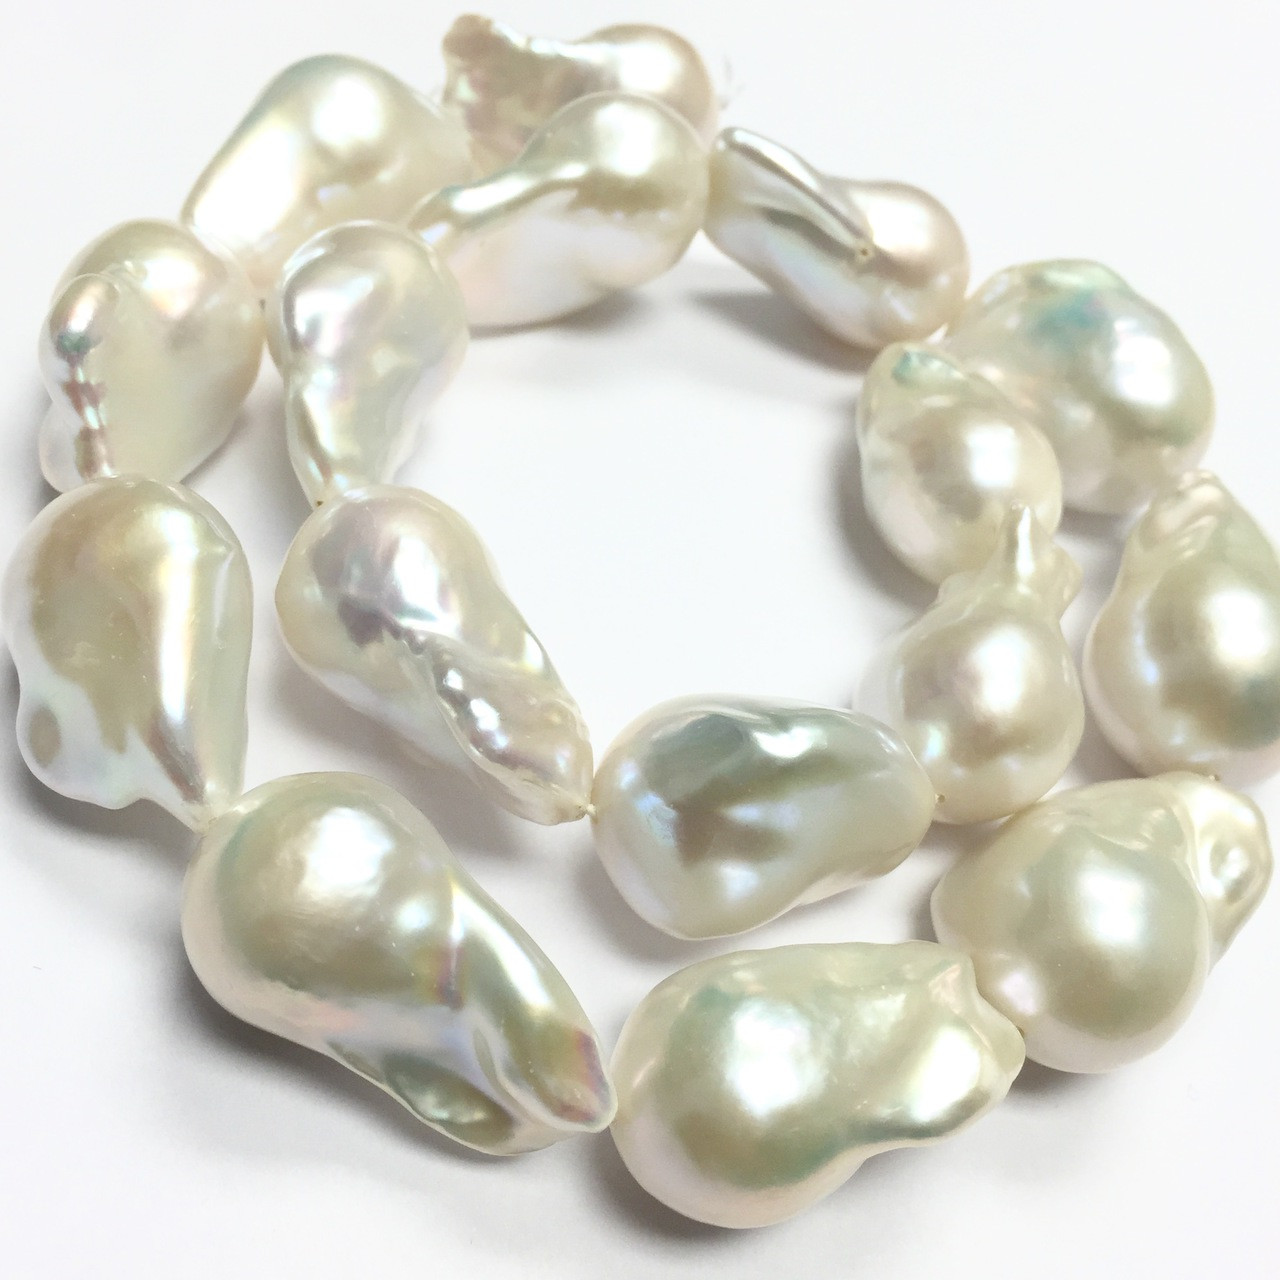 Unique Beads for Jewelry Making | Baroque Pearls | Unique Pearls